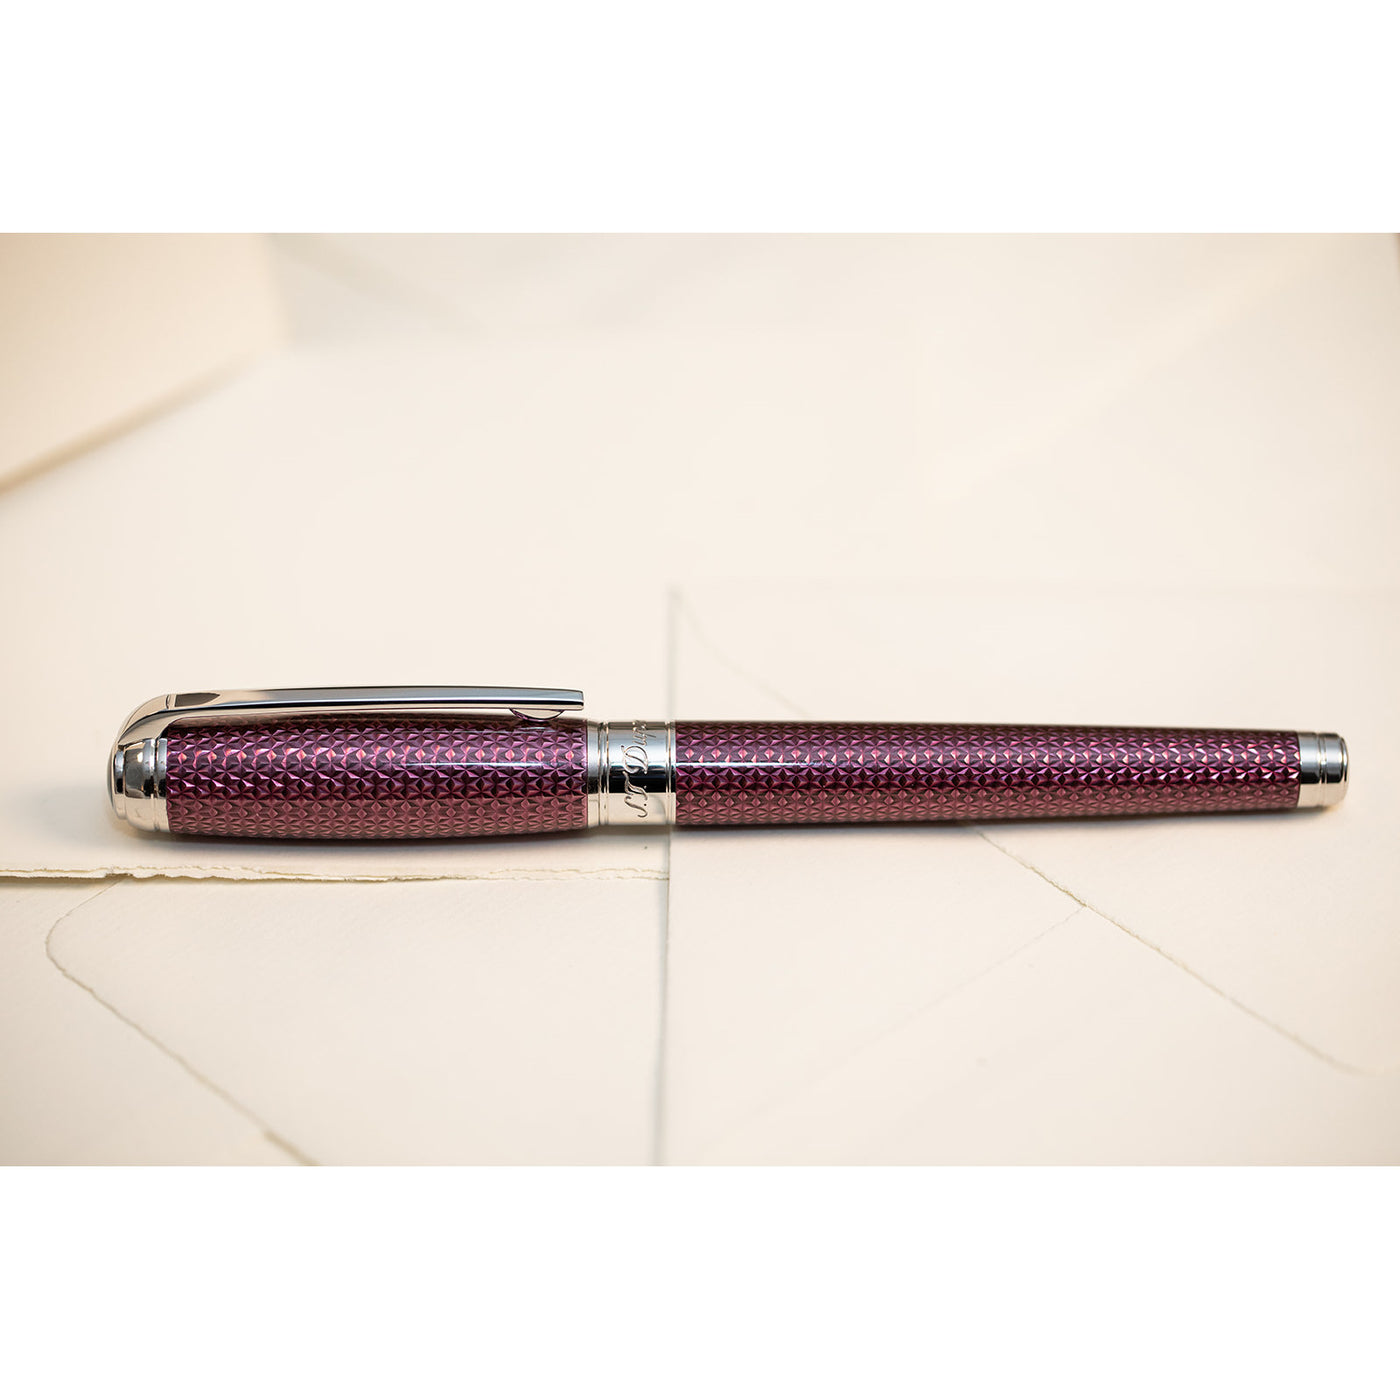 S.T. Dupont Line D Large Fire-head Guilloche Fountain Pen - Amethyst with Palladium Trim | Atlas Stationers.